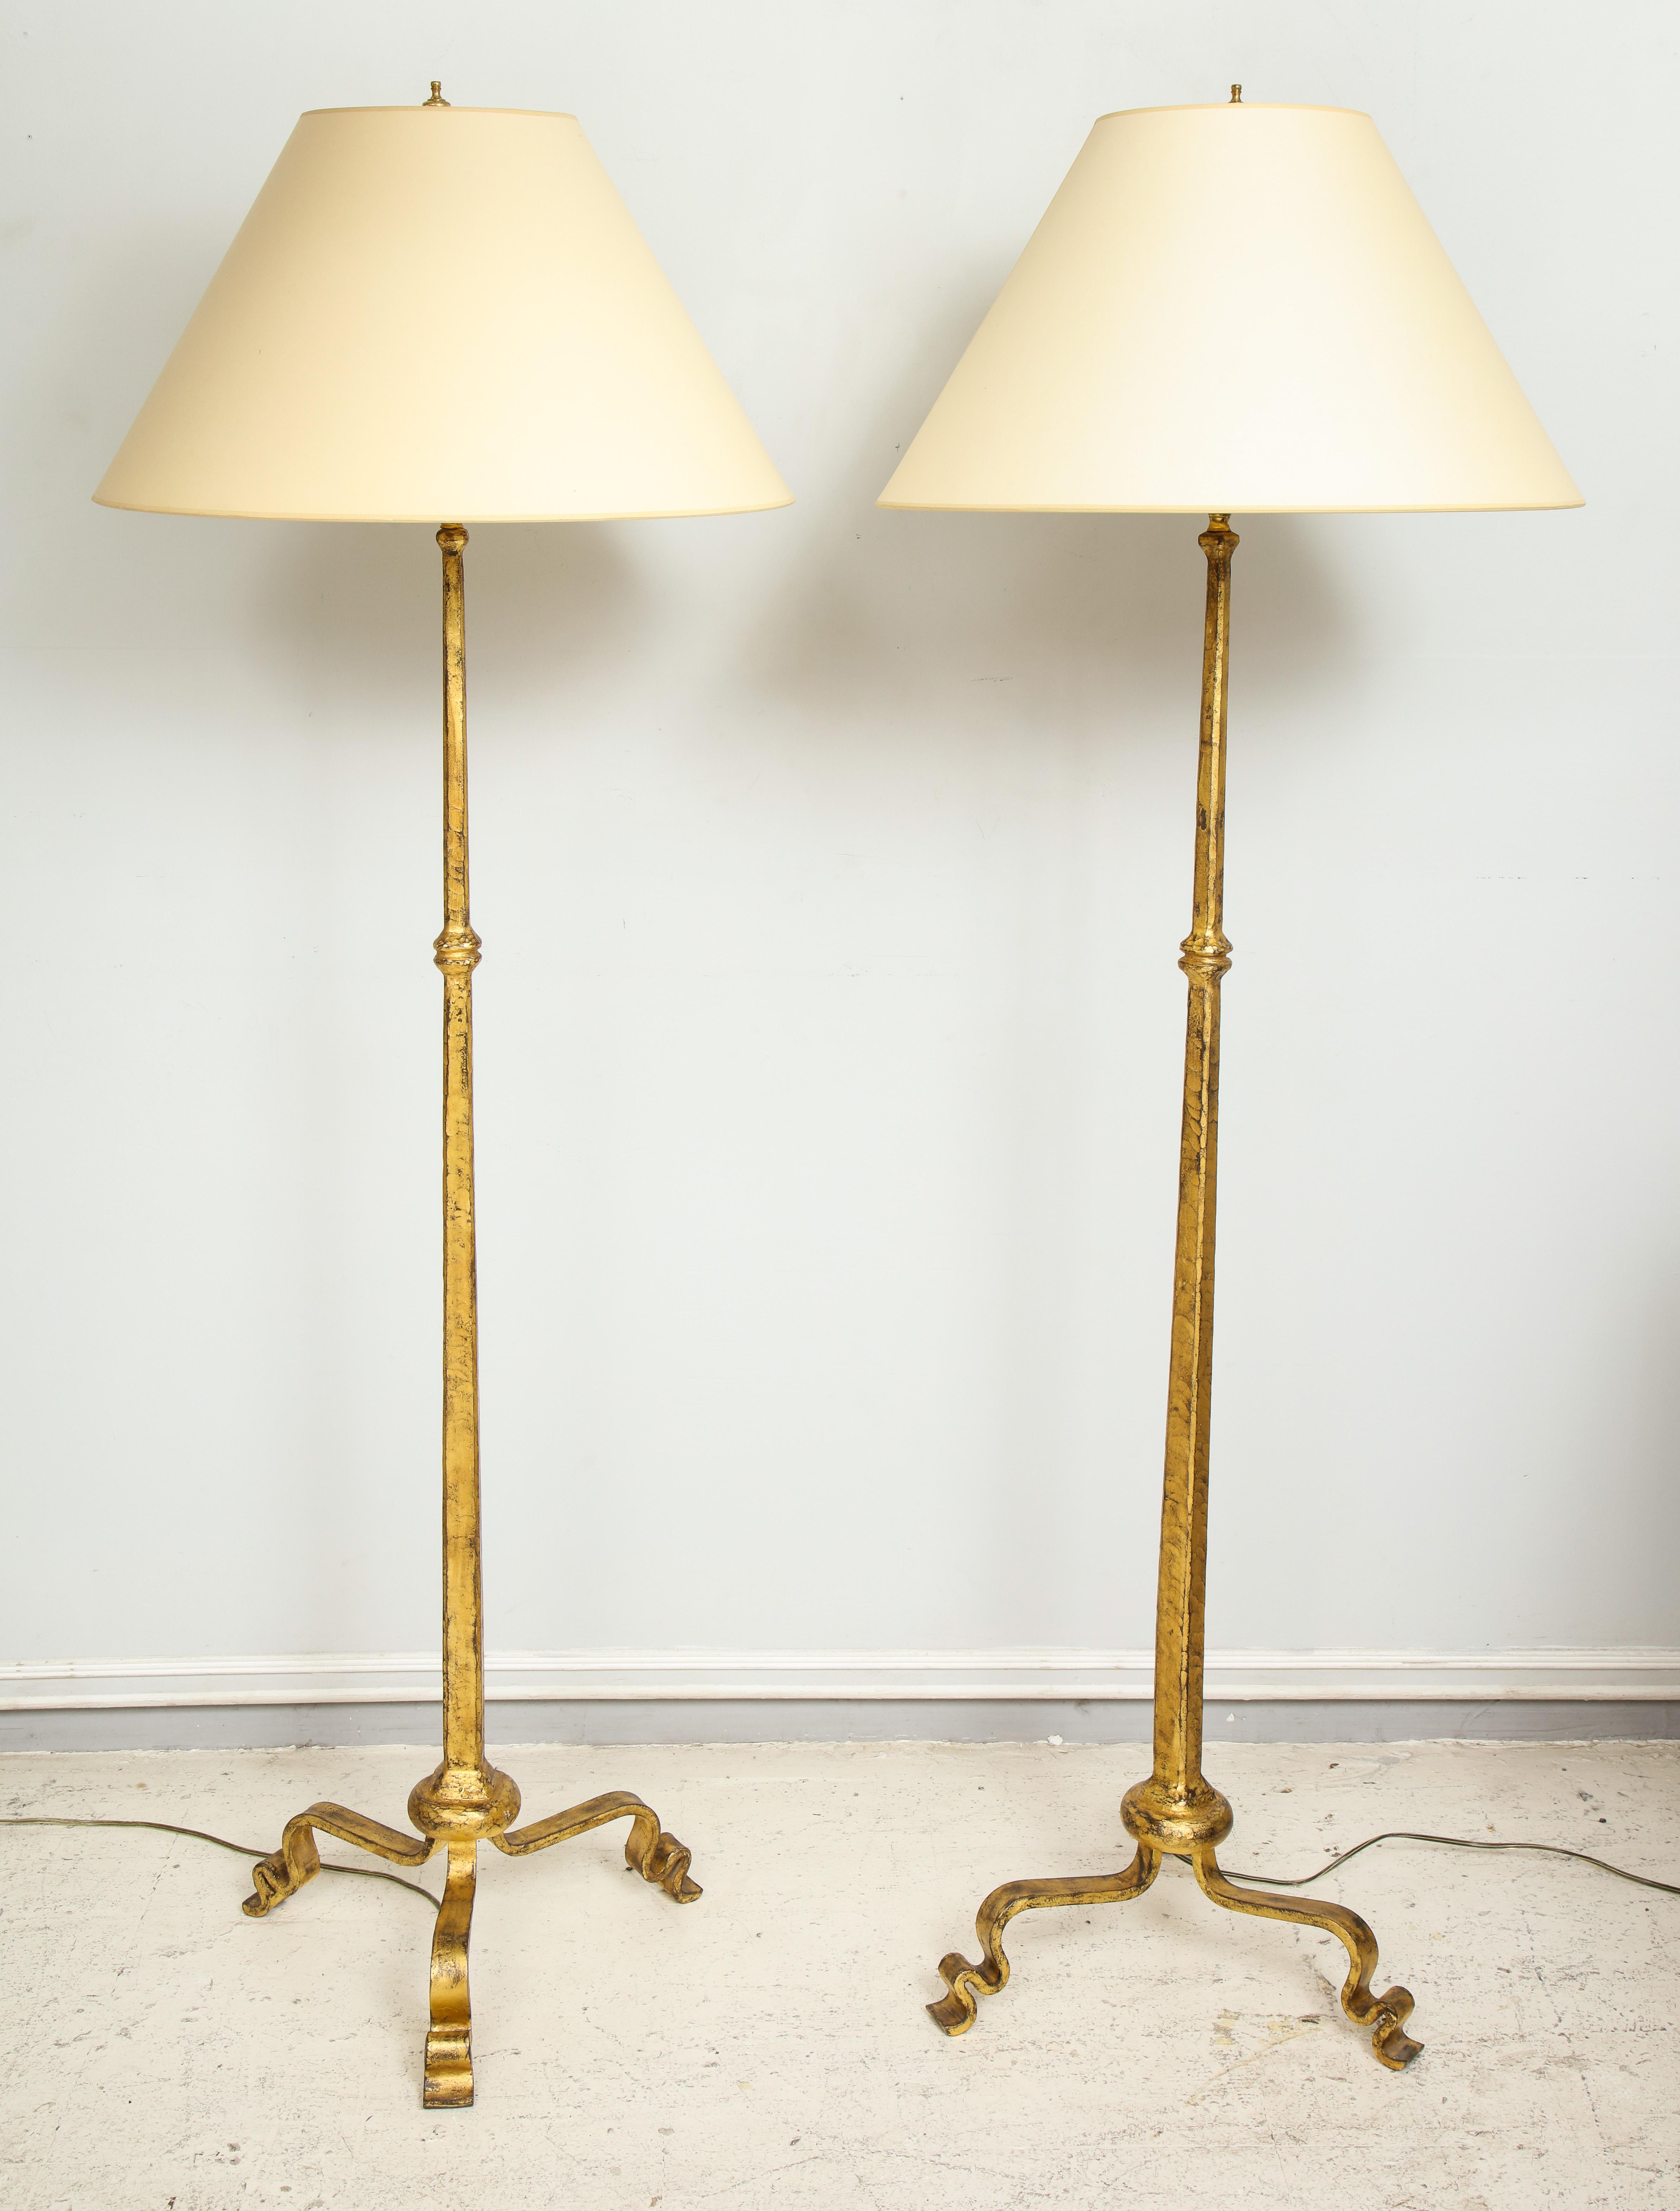 Pair of gilt wrought iron floor lamps in the Ramsay Manner, shades included.

Measurements are 62